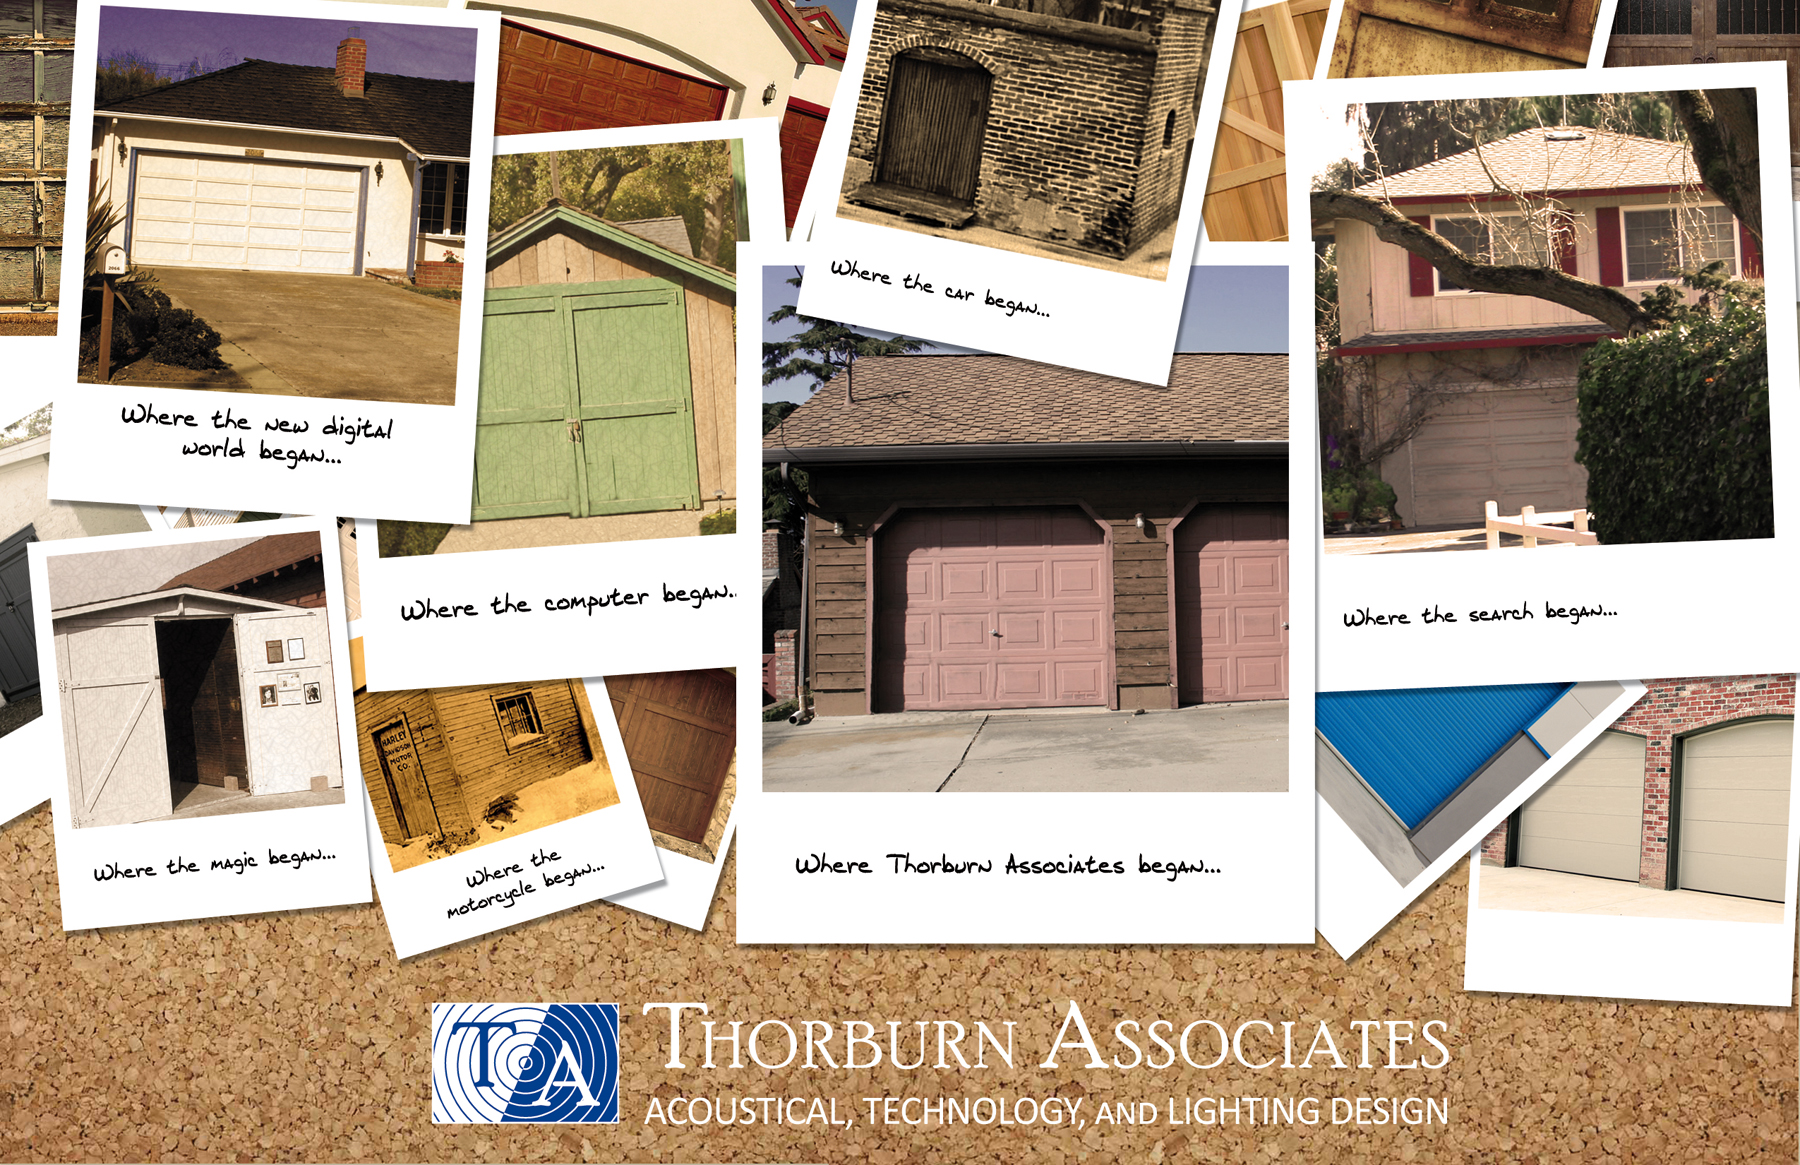 Thorburn Associates is one of the great companies that started in a garage!